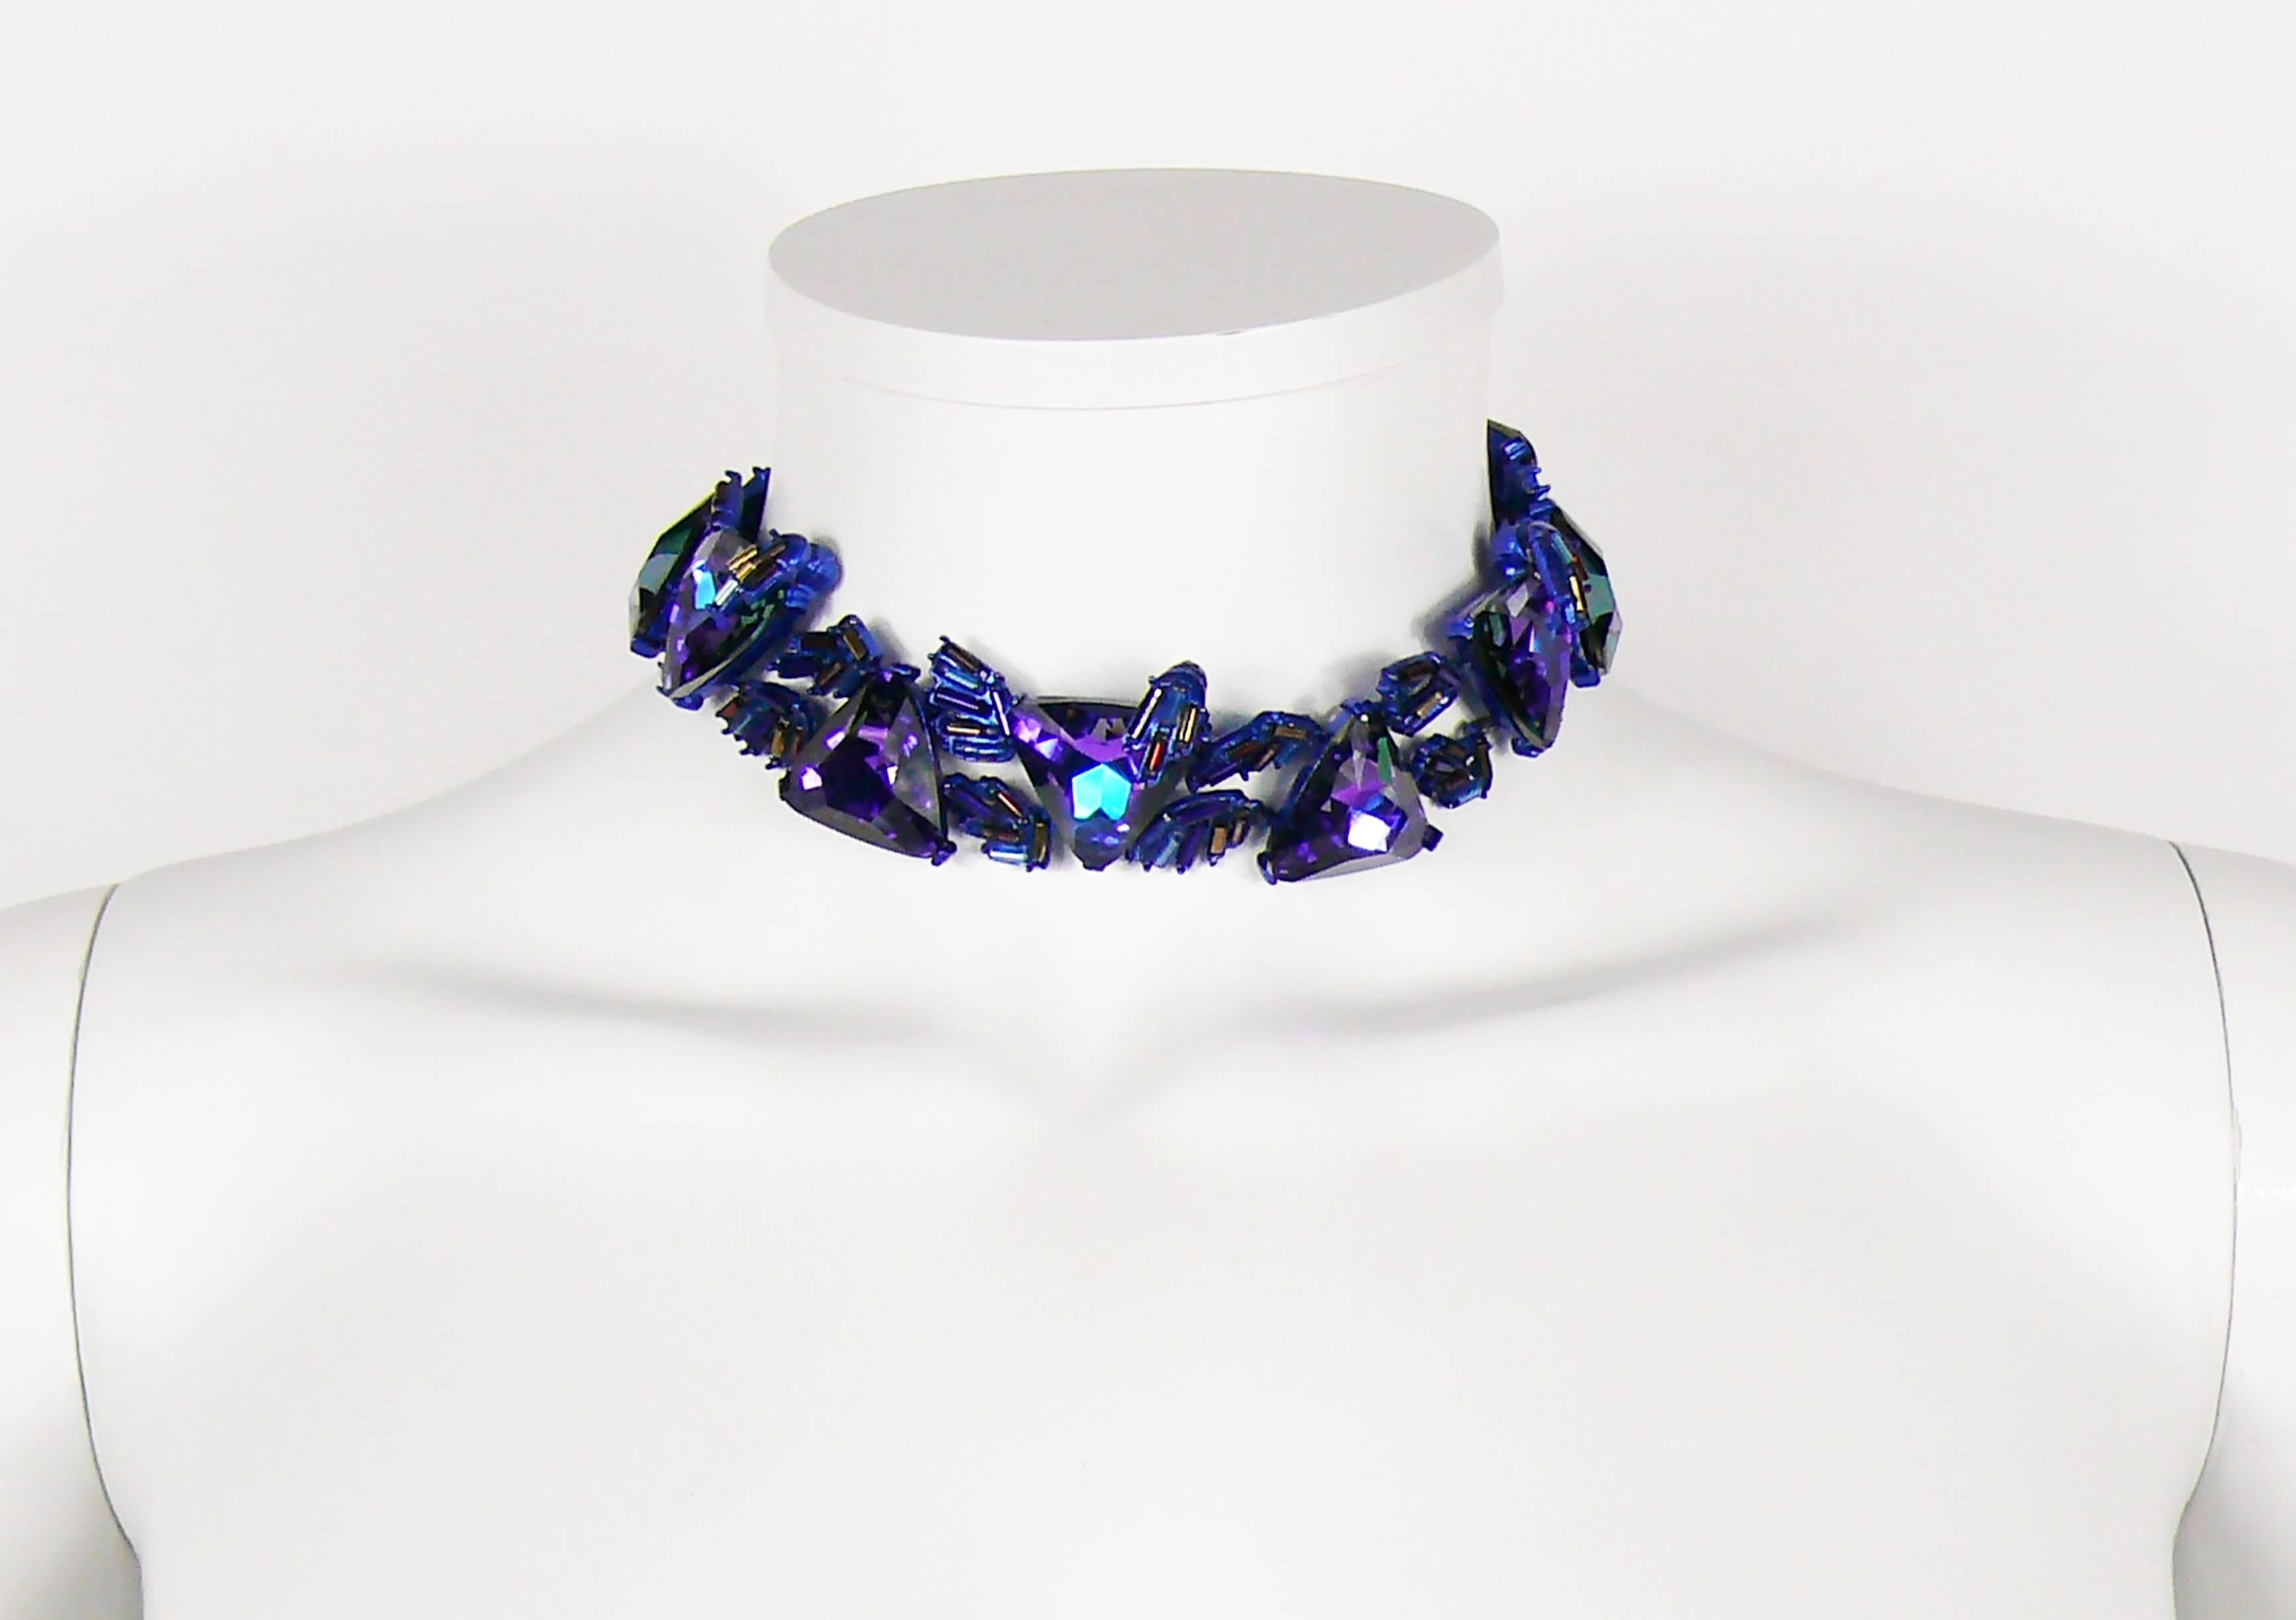 CHRISTIAN LACROIX vintage choker necklace featuring massive purple crystals with iridescent rocaille beads.

Hook clasp.
Extension chain.

Marked CHRISTIAN LACROIX CL Made in France.

Indicative measurements : max. length approx. 40 cm (15.75